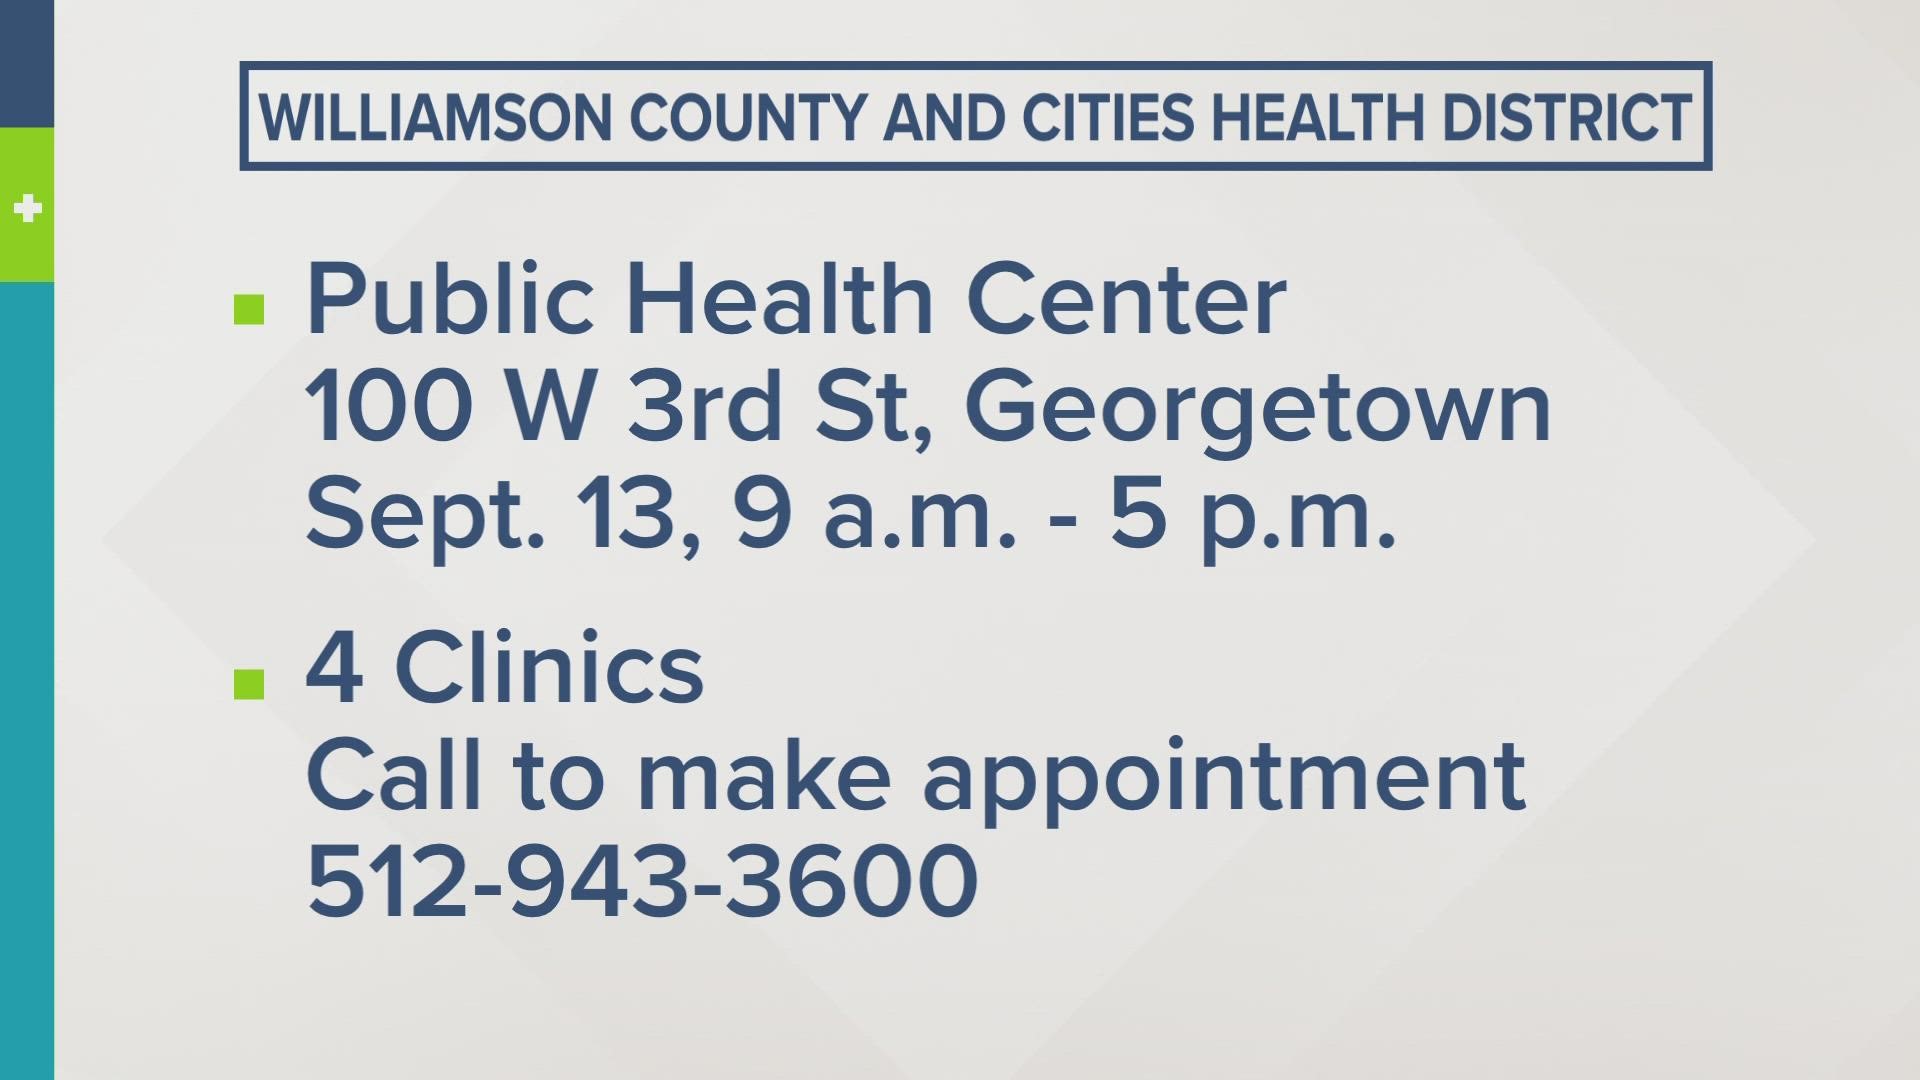 Williamson County is now offering updated COVID-19 booster vaccines.